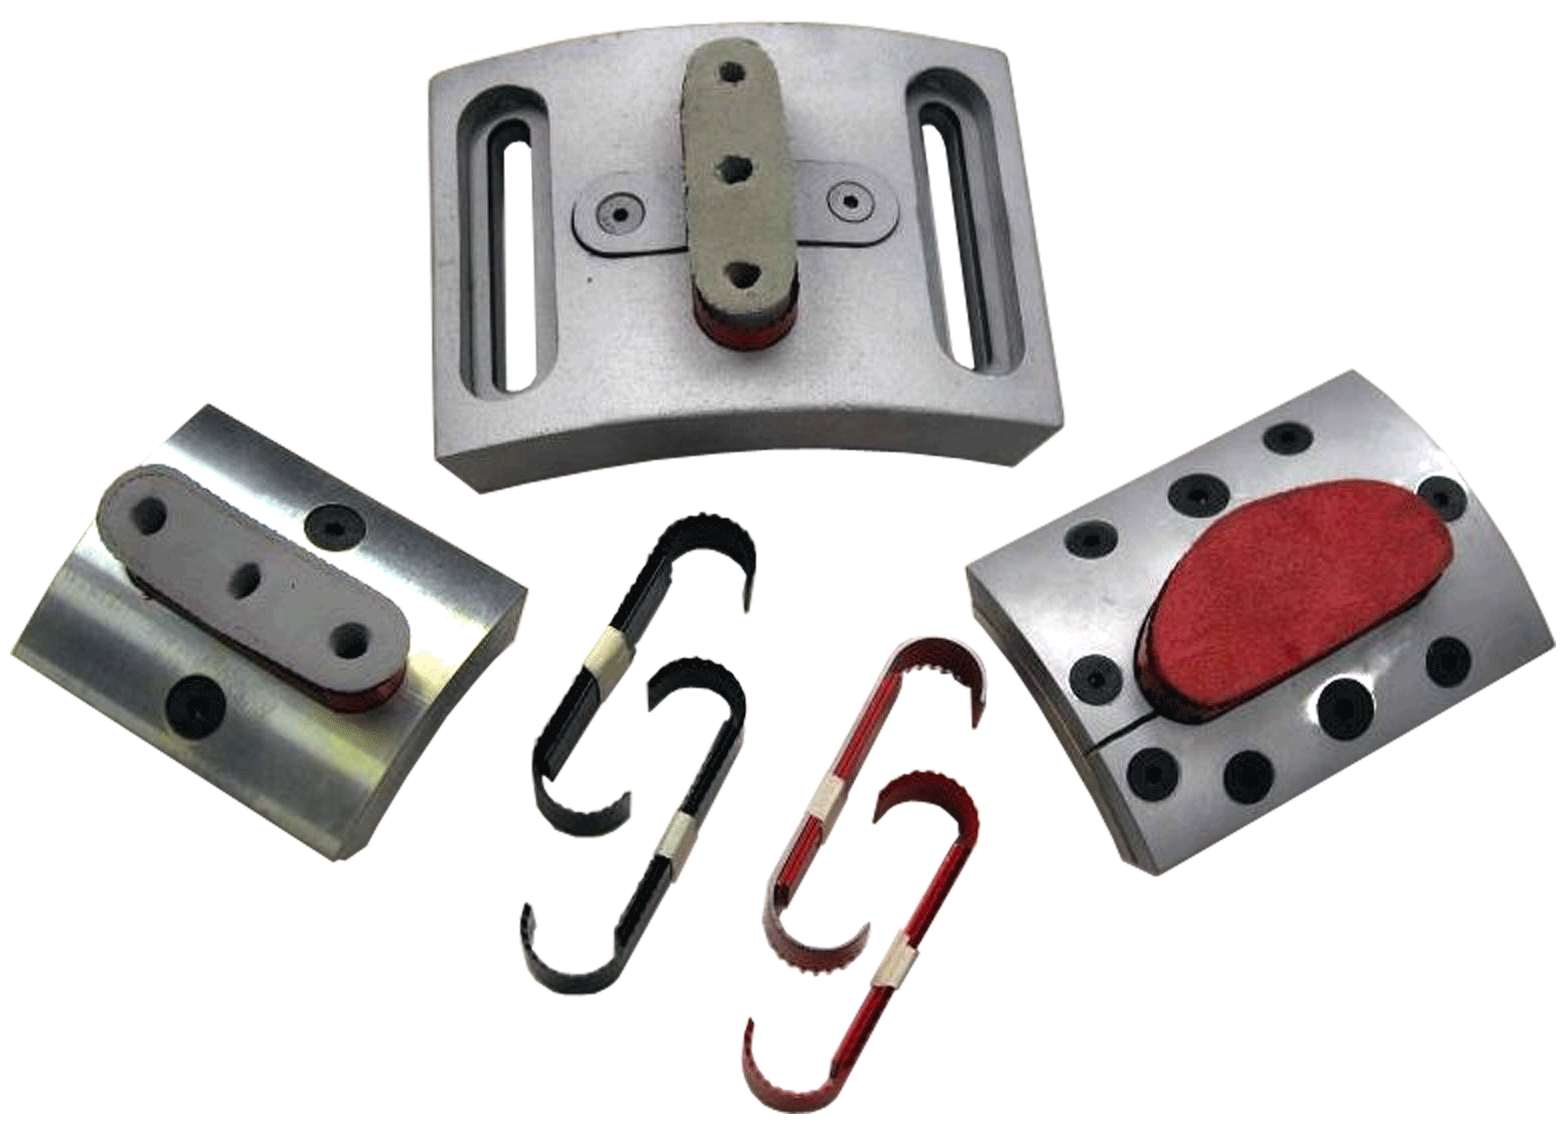 Hand Hole Attachments